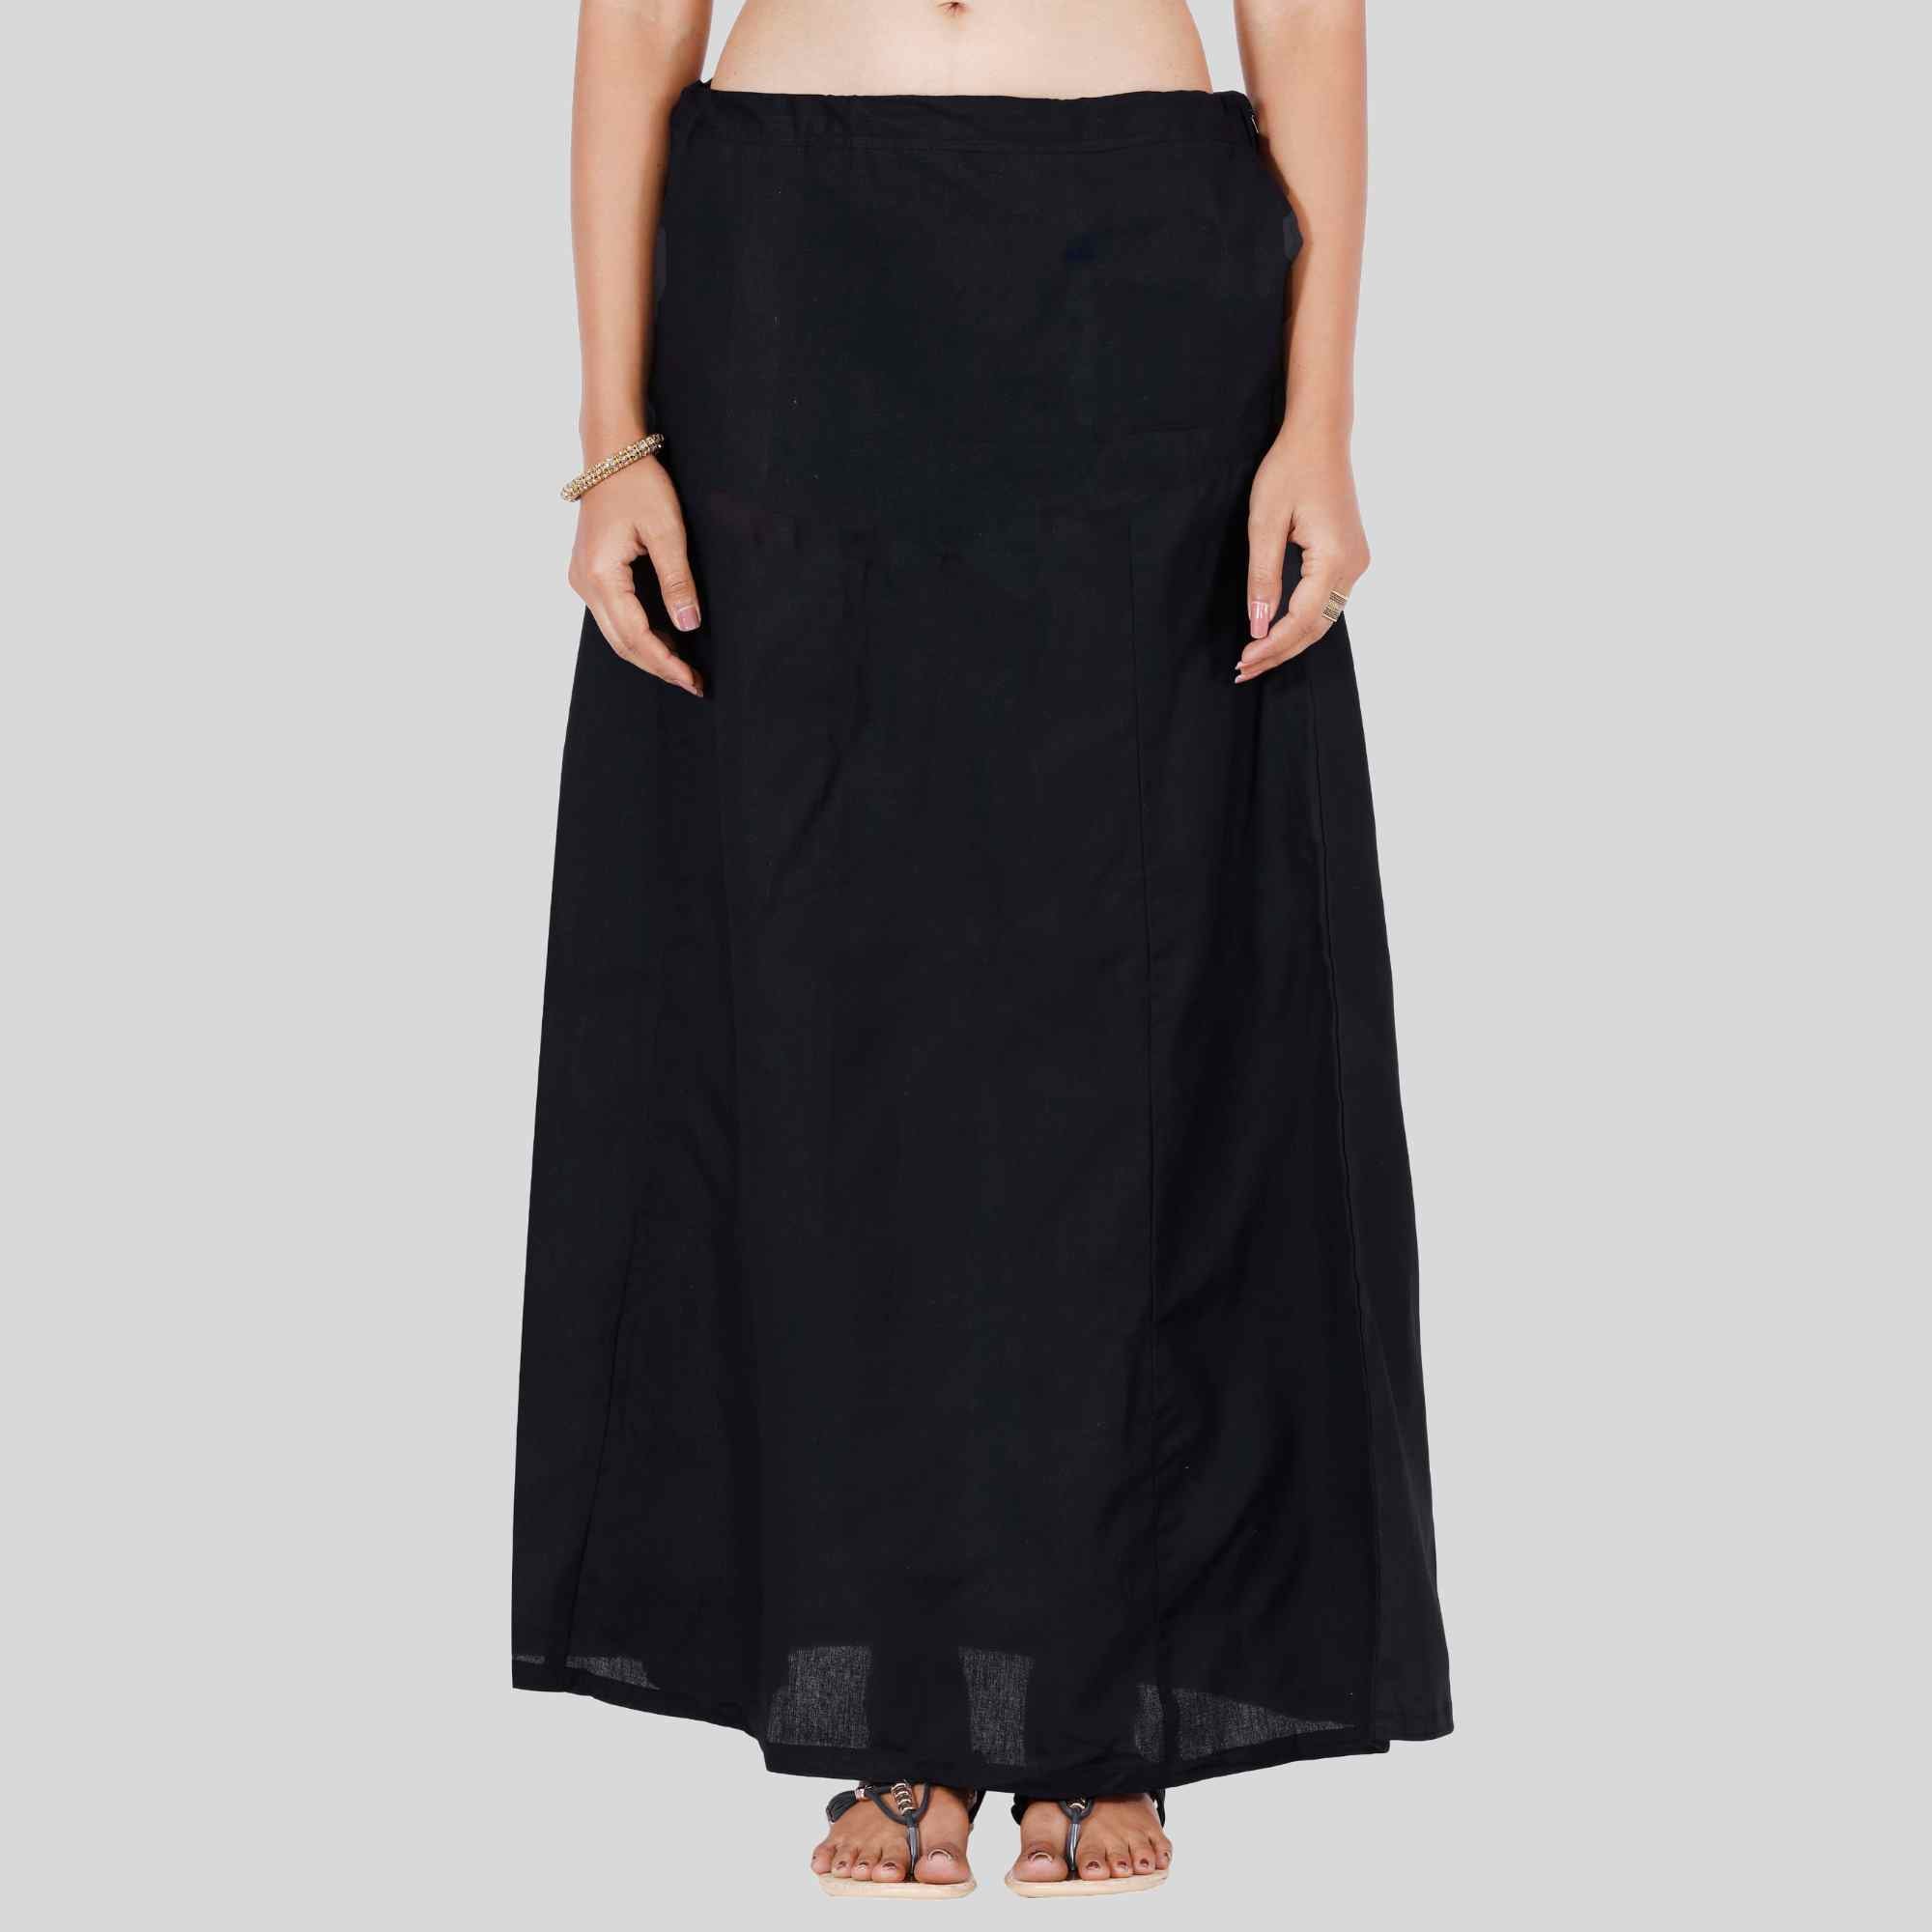 black color saree inskirts online in cotton